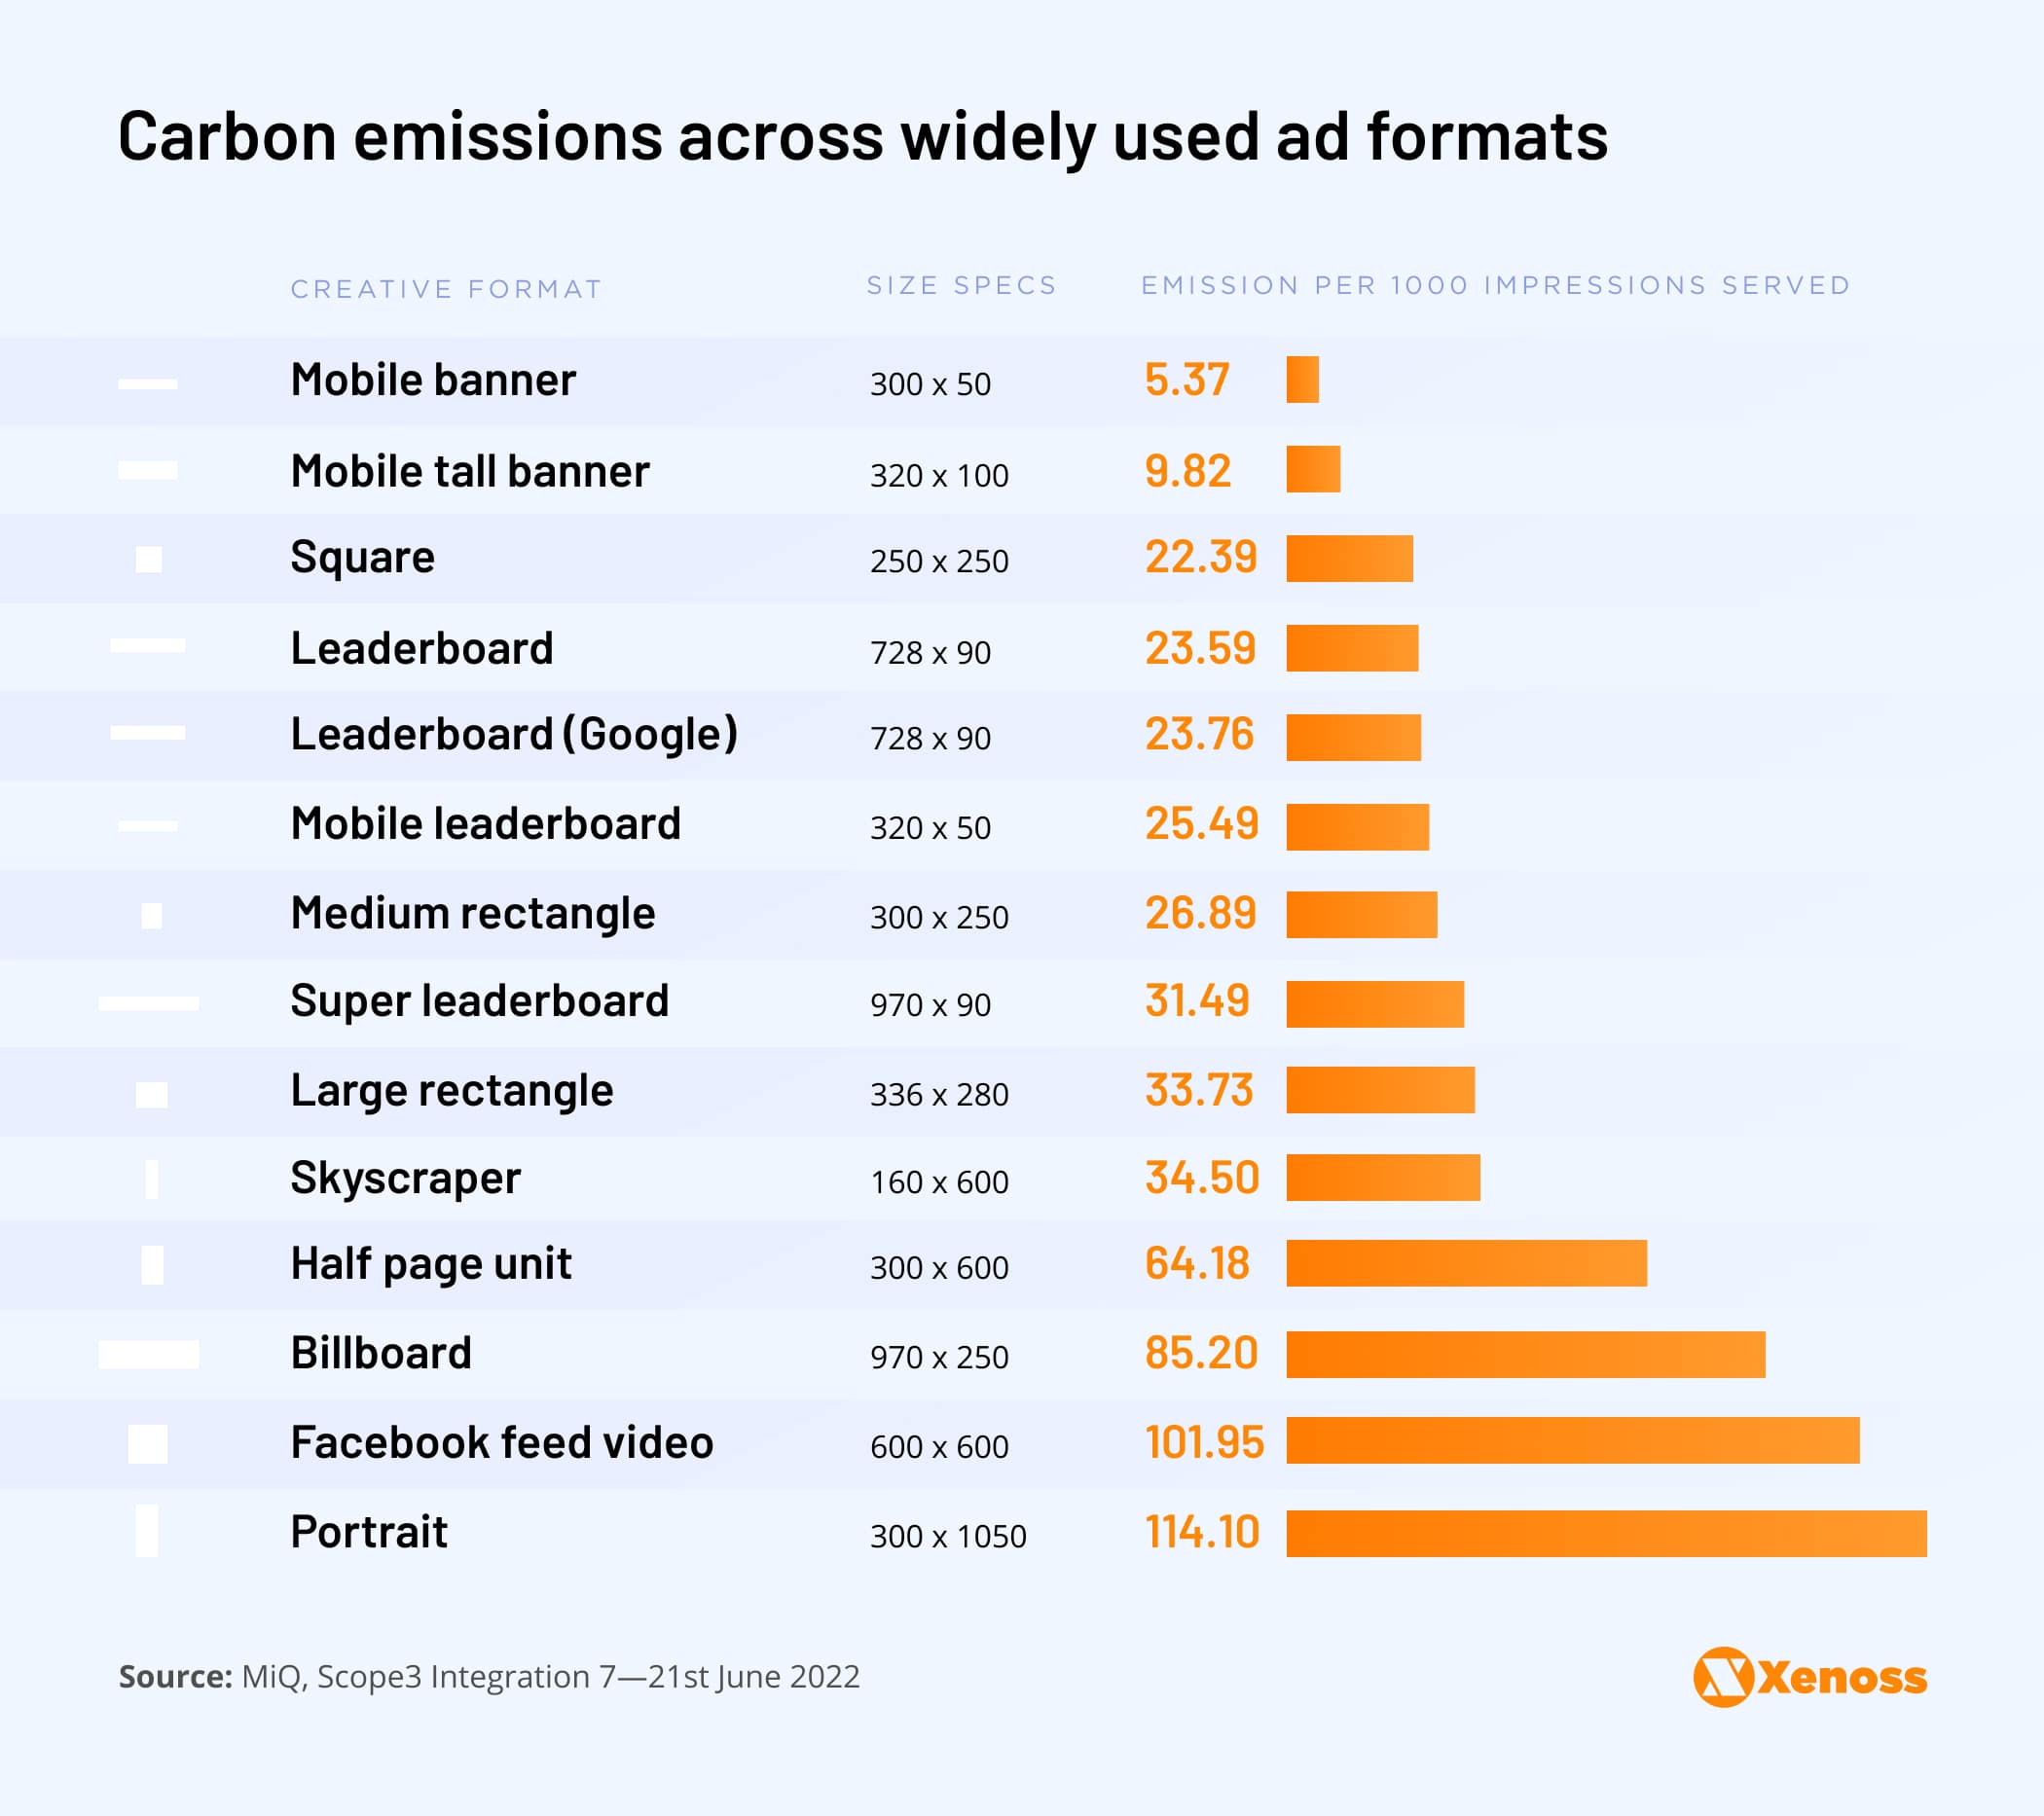 Carbon emissions generated across widely used ad formats | Xenoss Blog